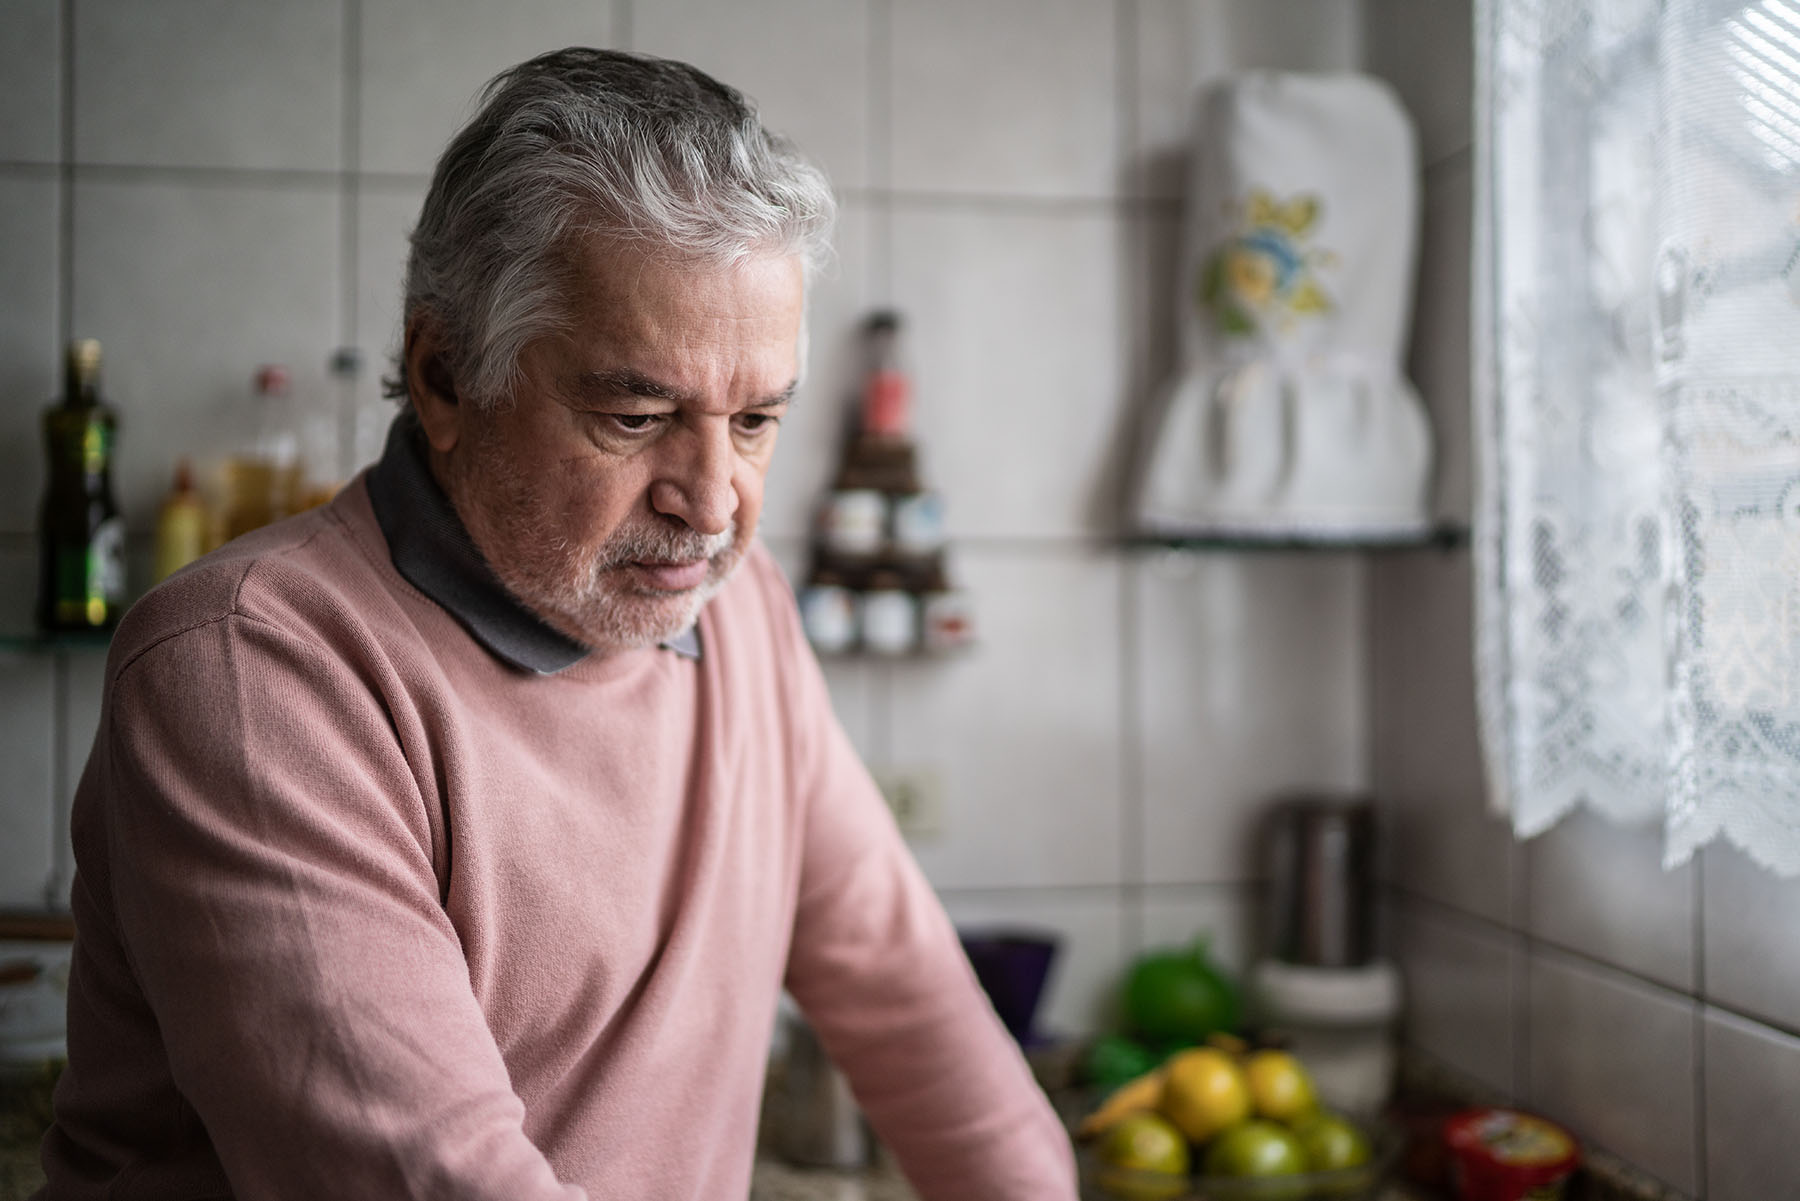 Older Hispanic man leans against kitchen counter, is worried or sad.